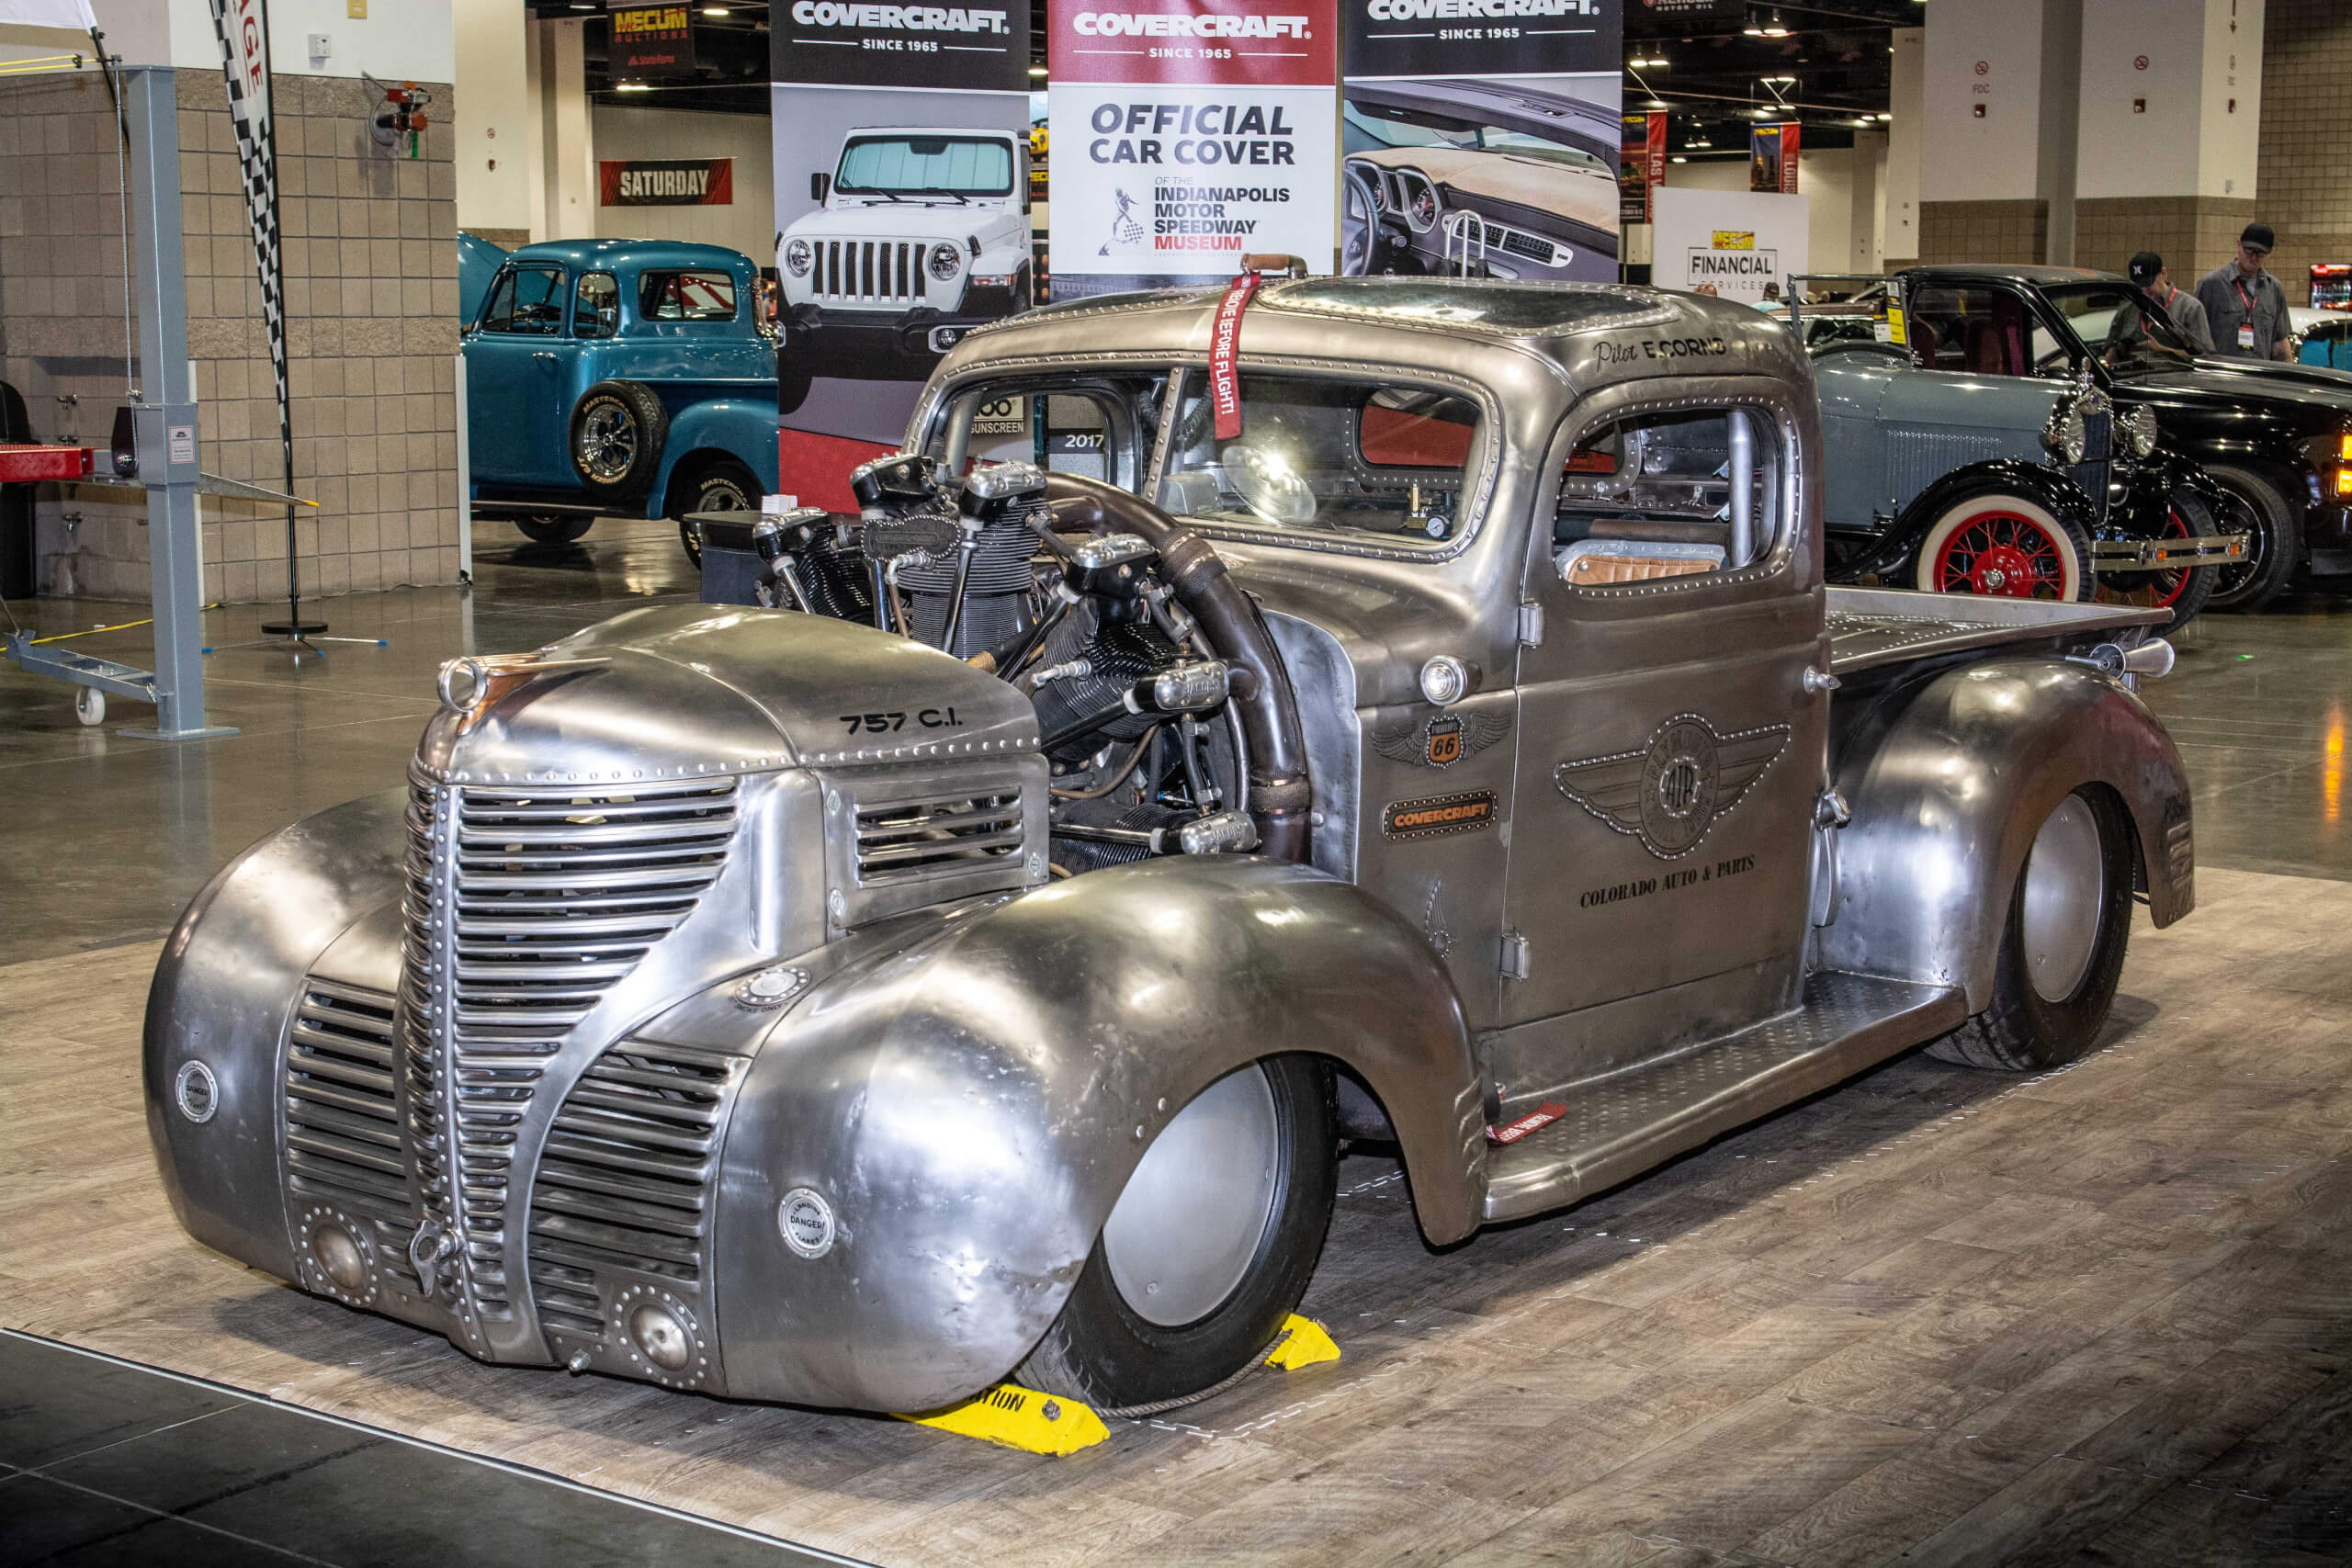 Gary Corns' custom 1939 Plymouth pickup truck features a radial engine from a 1954 Cessna airplane.